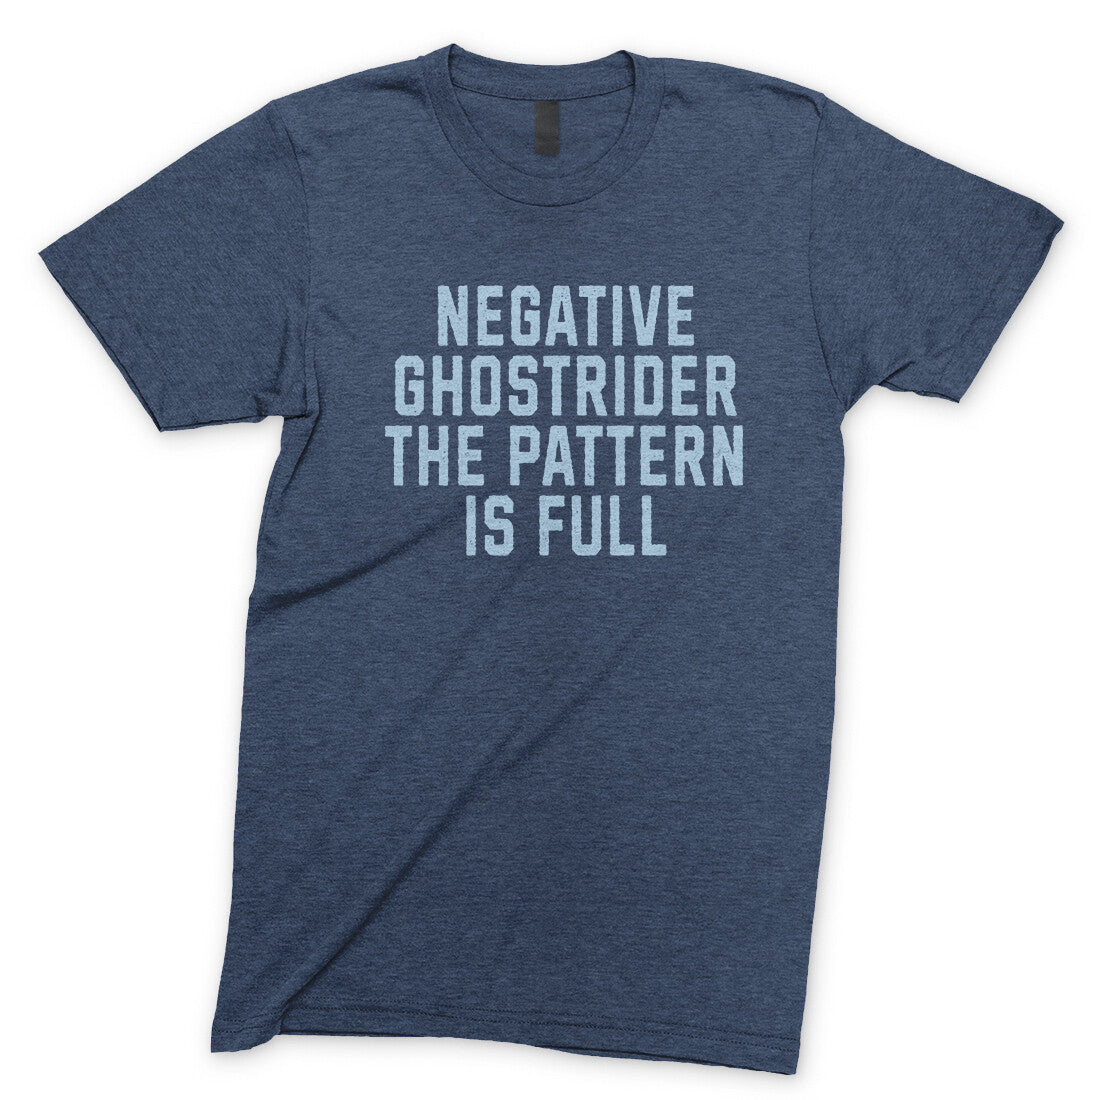 Negative Ghostrider the Pattern is Full in Navy Heather Color